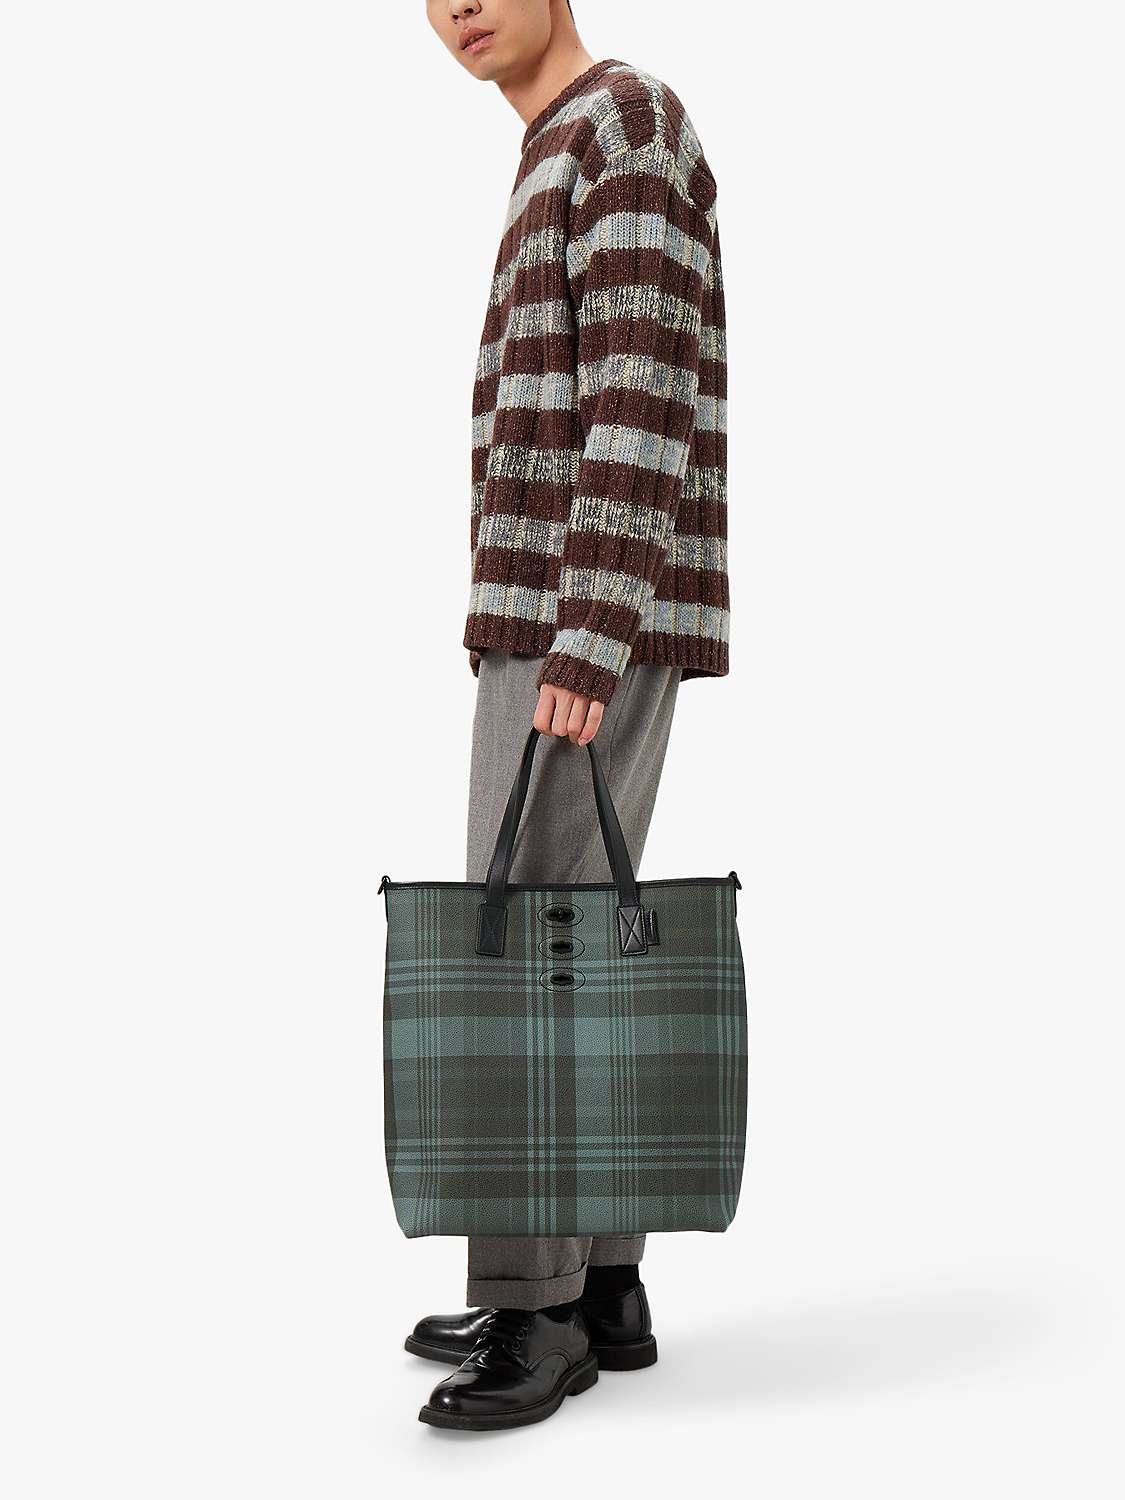 Buy Mulberry Bryn Printed Eco Scotchgrain & Flat Calf Leather Tote Bag, Mulberry Green Online at johnlewis.com